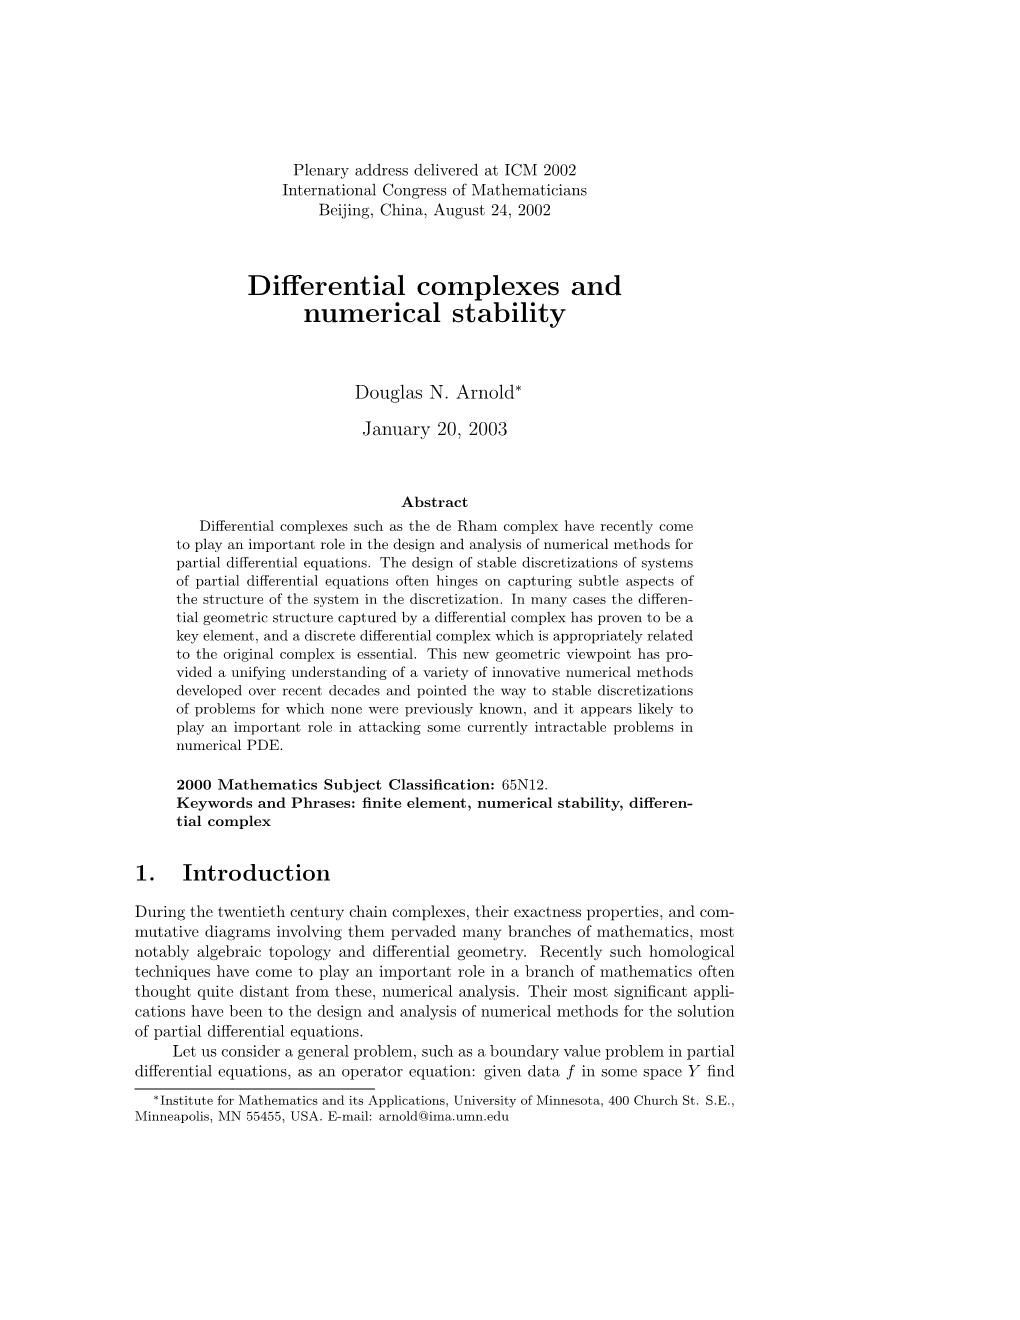 Differential Complexes and Numerical Stability